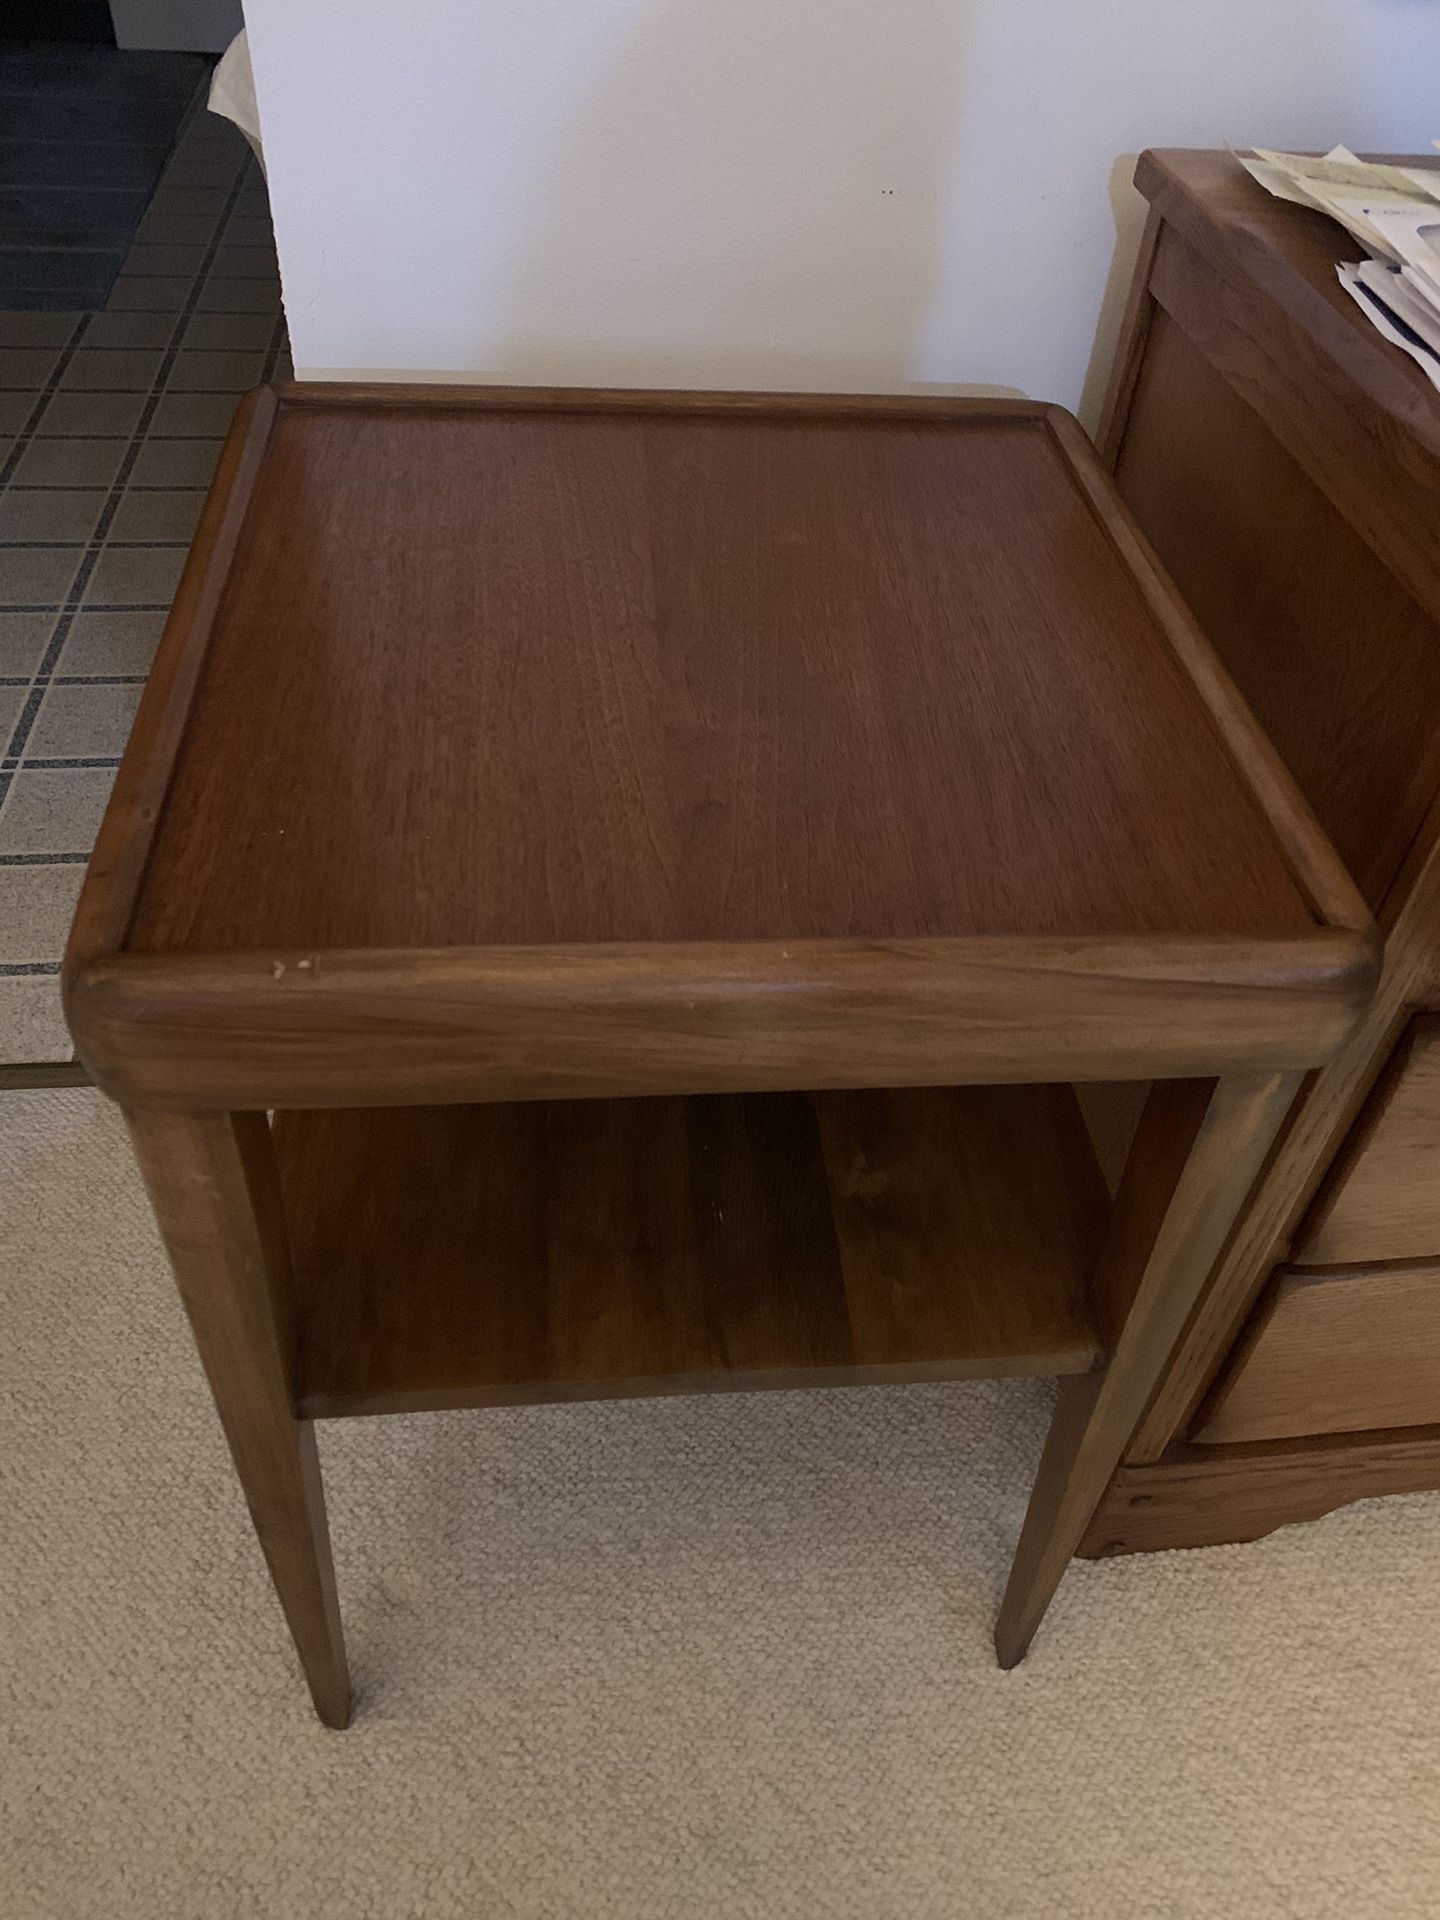 Solid wood Table w/shelf…17.3/4”x17.3/4” Square..25.1/2”High